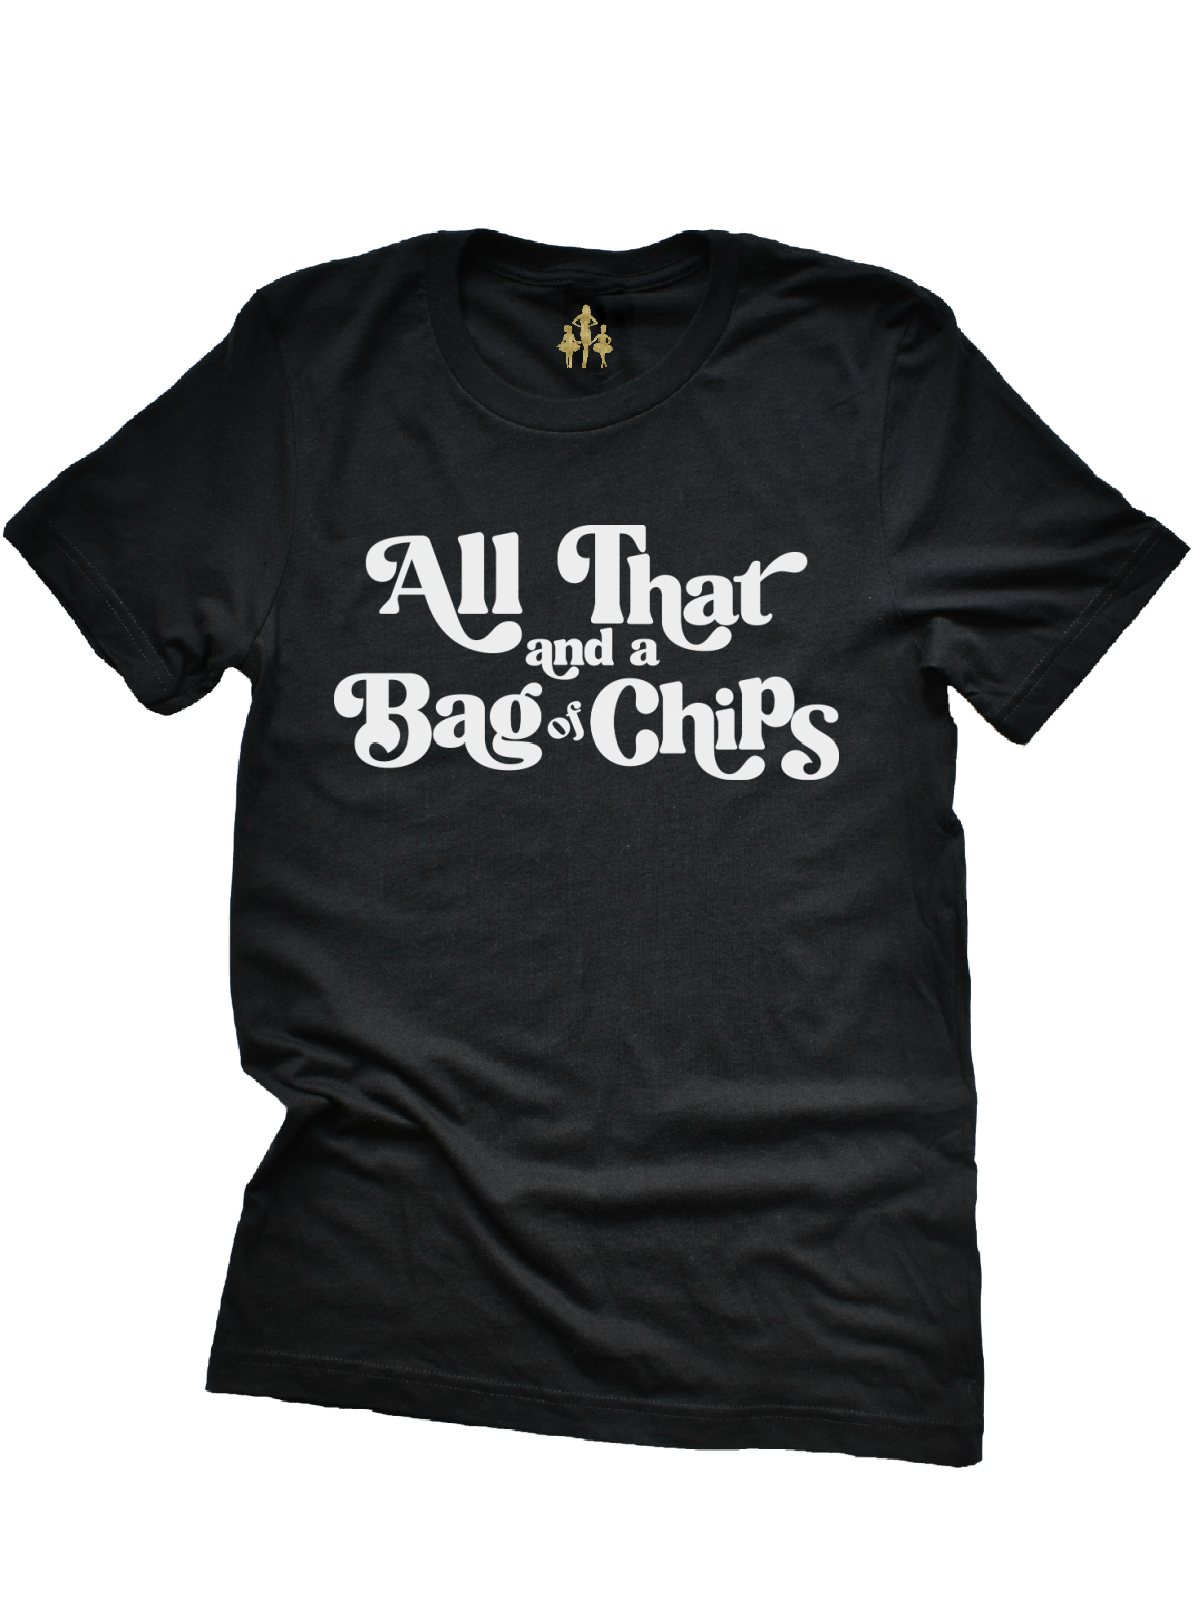 All That and a Bag of Chips Womens Black Shirt